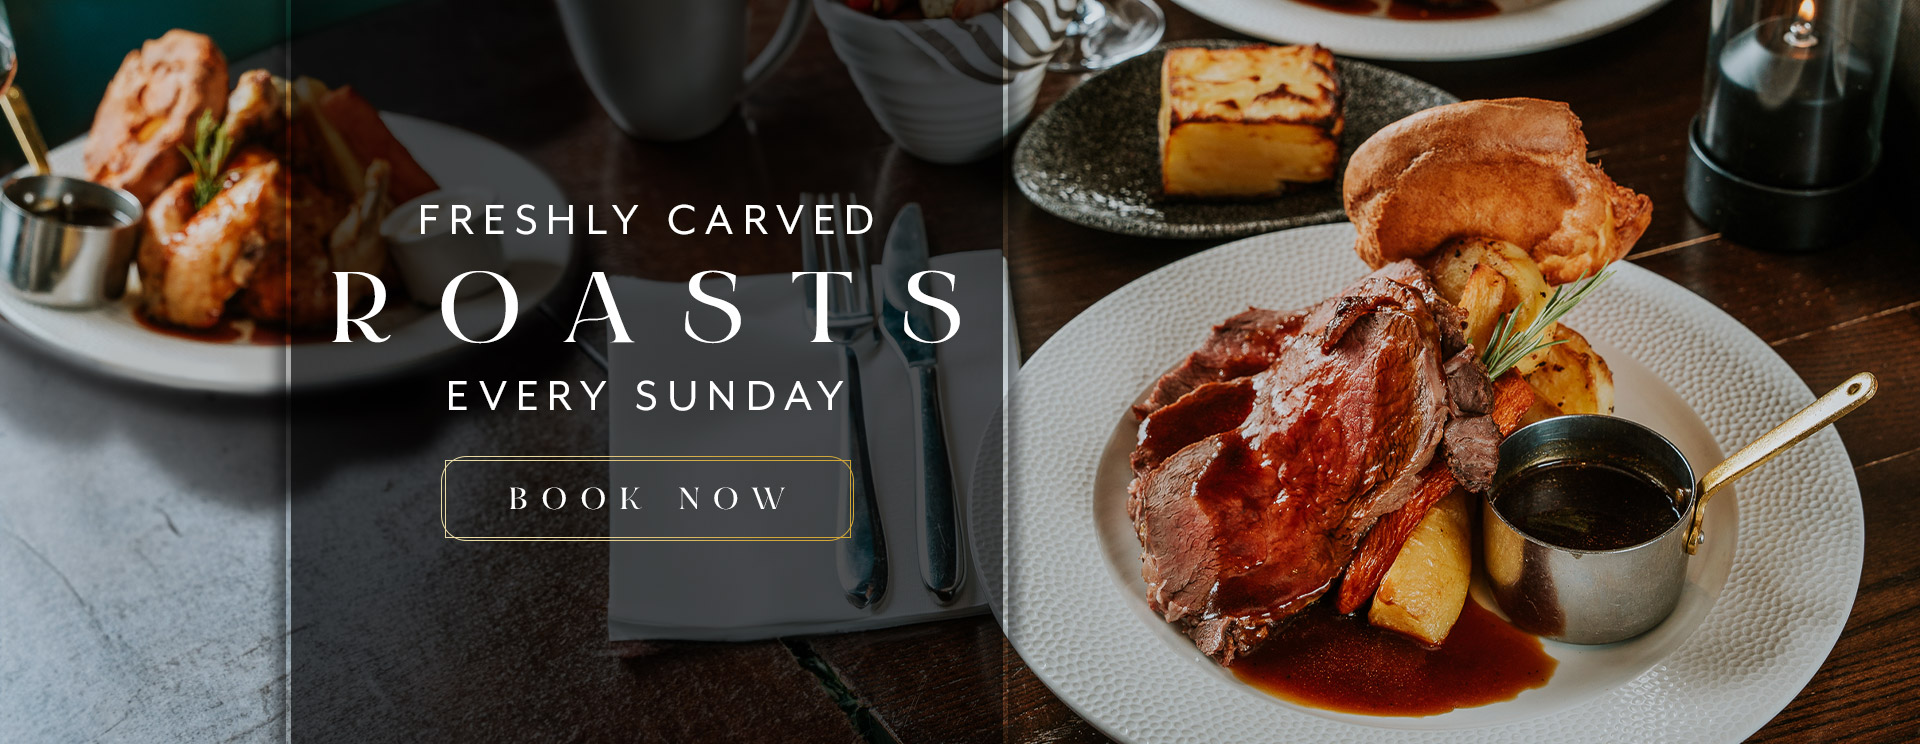 Sunday Lunch at The Langton